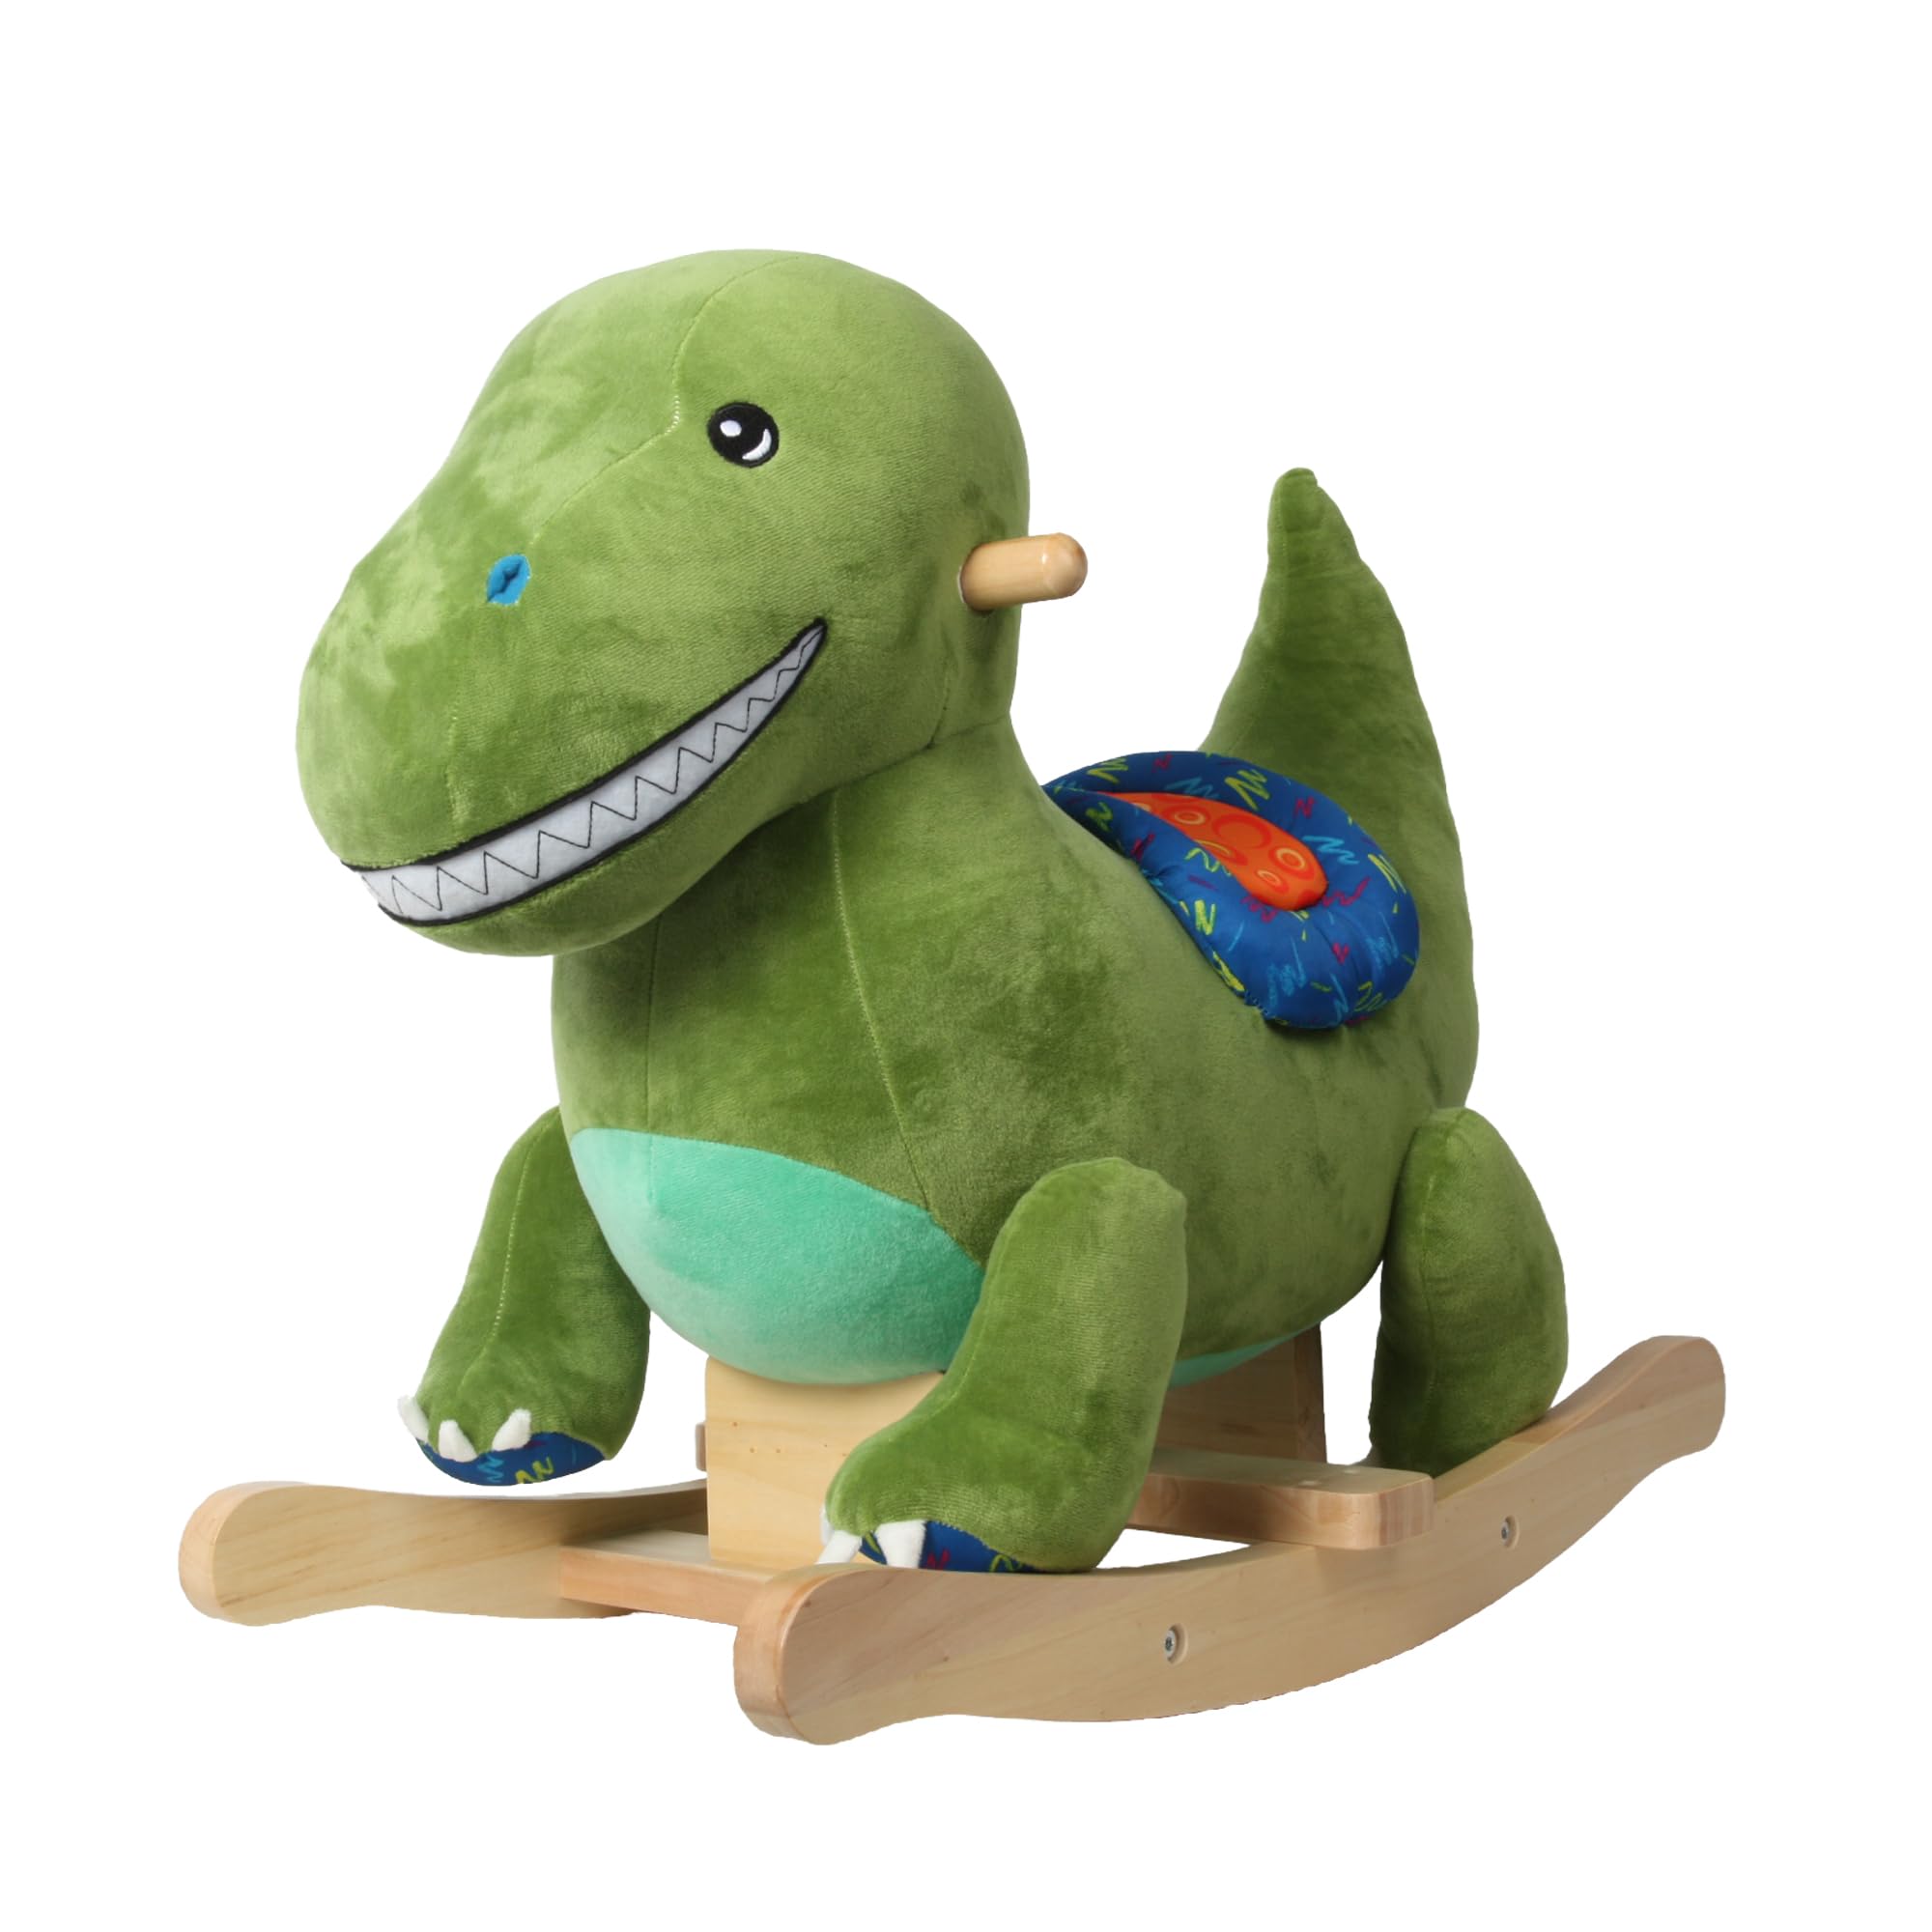 Linzy Toys Green Dinosaur Baby Rocker, Kids Ride on Toy for Toddlers Age 1+, Infant (Boy/Girl) Plush Animal Rocker, Green,(37629), 23.6 x 13.7 x 19.6 inches